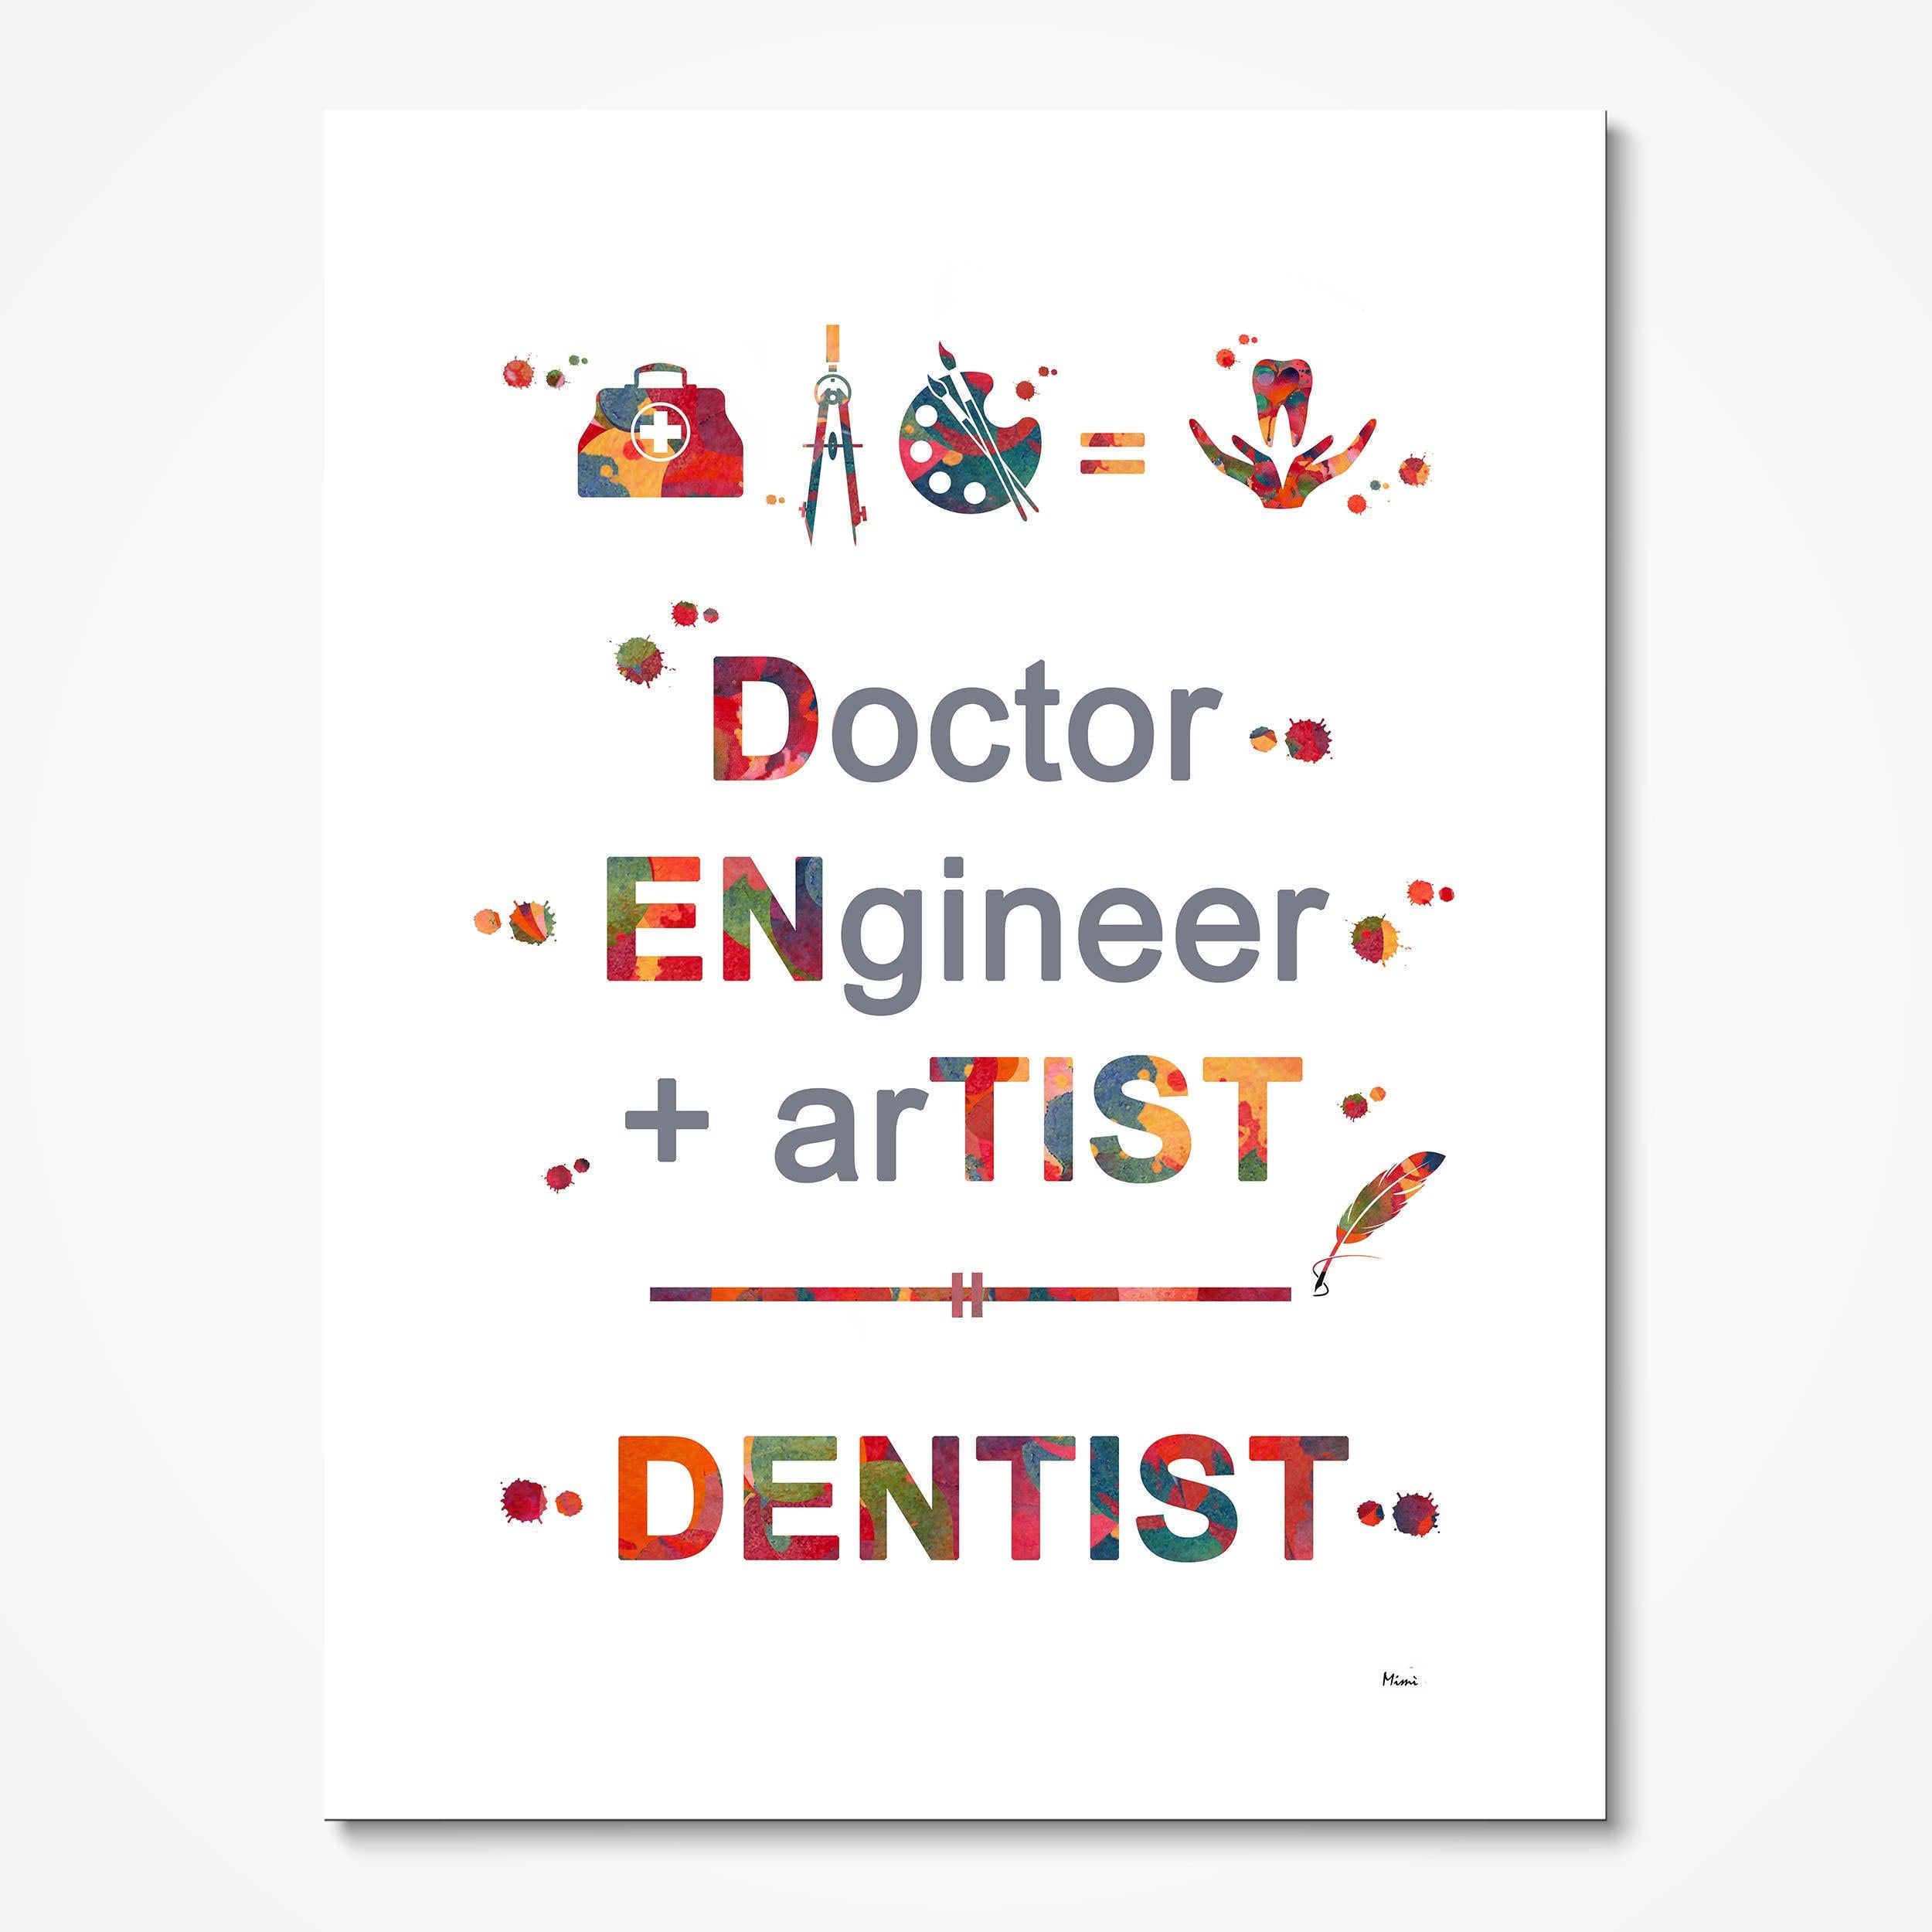 Dental Art Dentist Print With Quote Doctor Engineer Artist Dentist Dental Care Poster Dentist Clinic Wall Decor Print